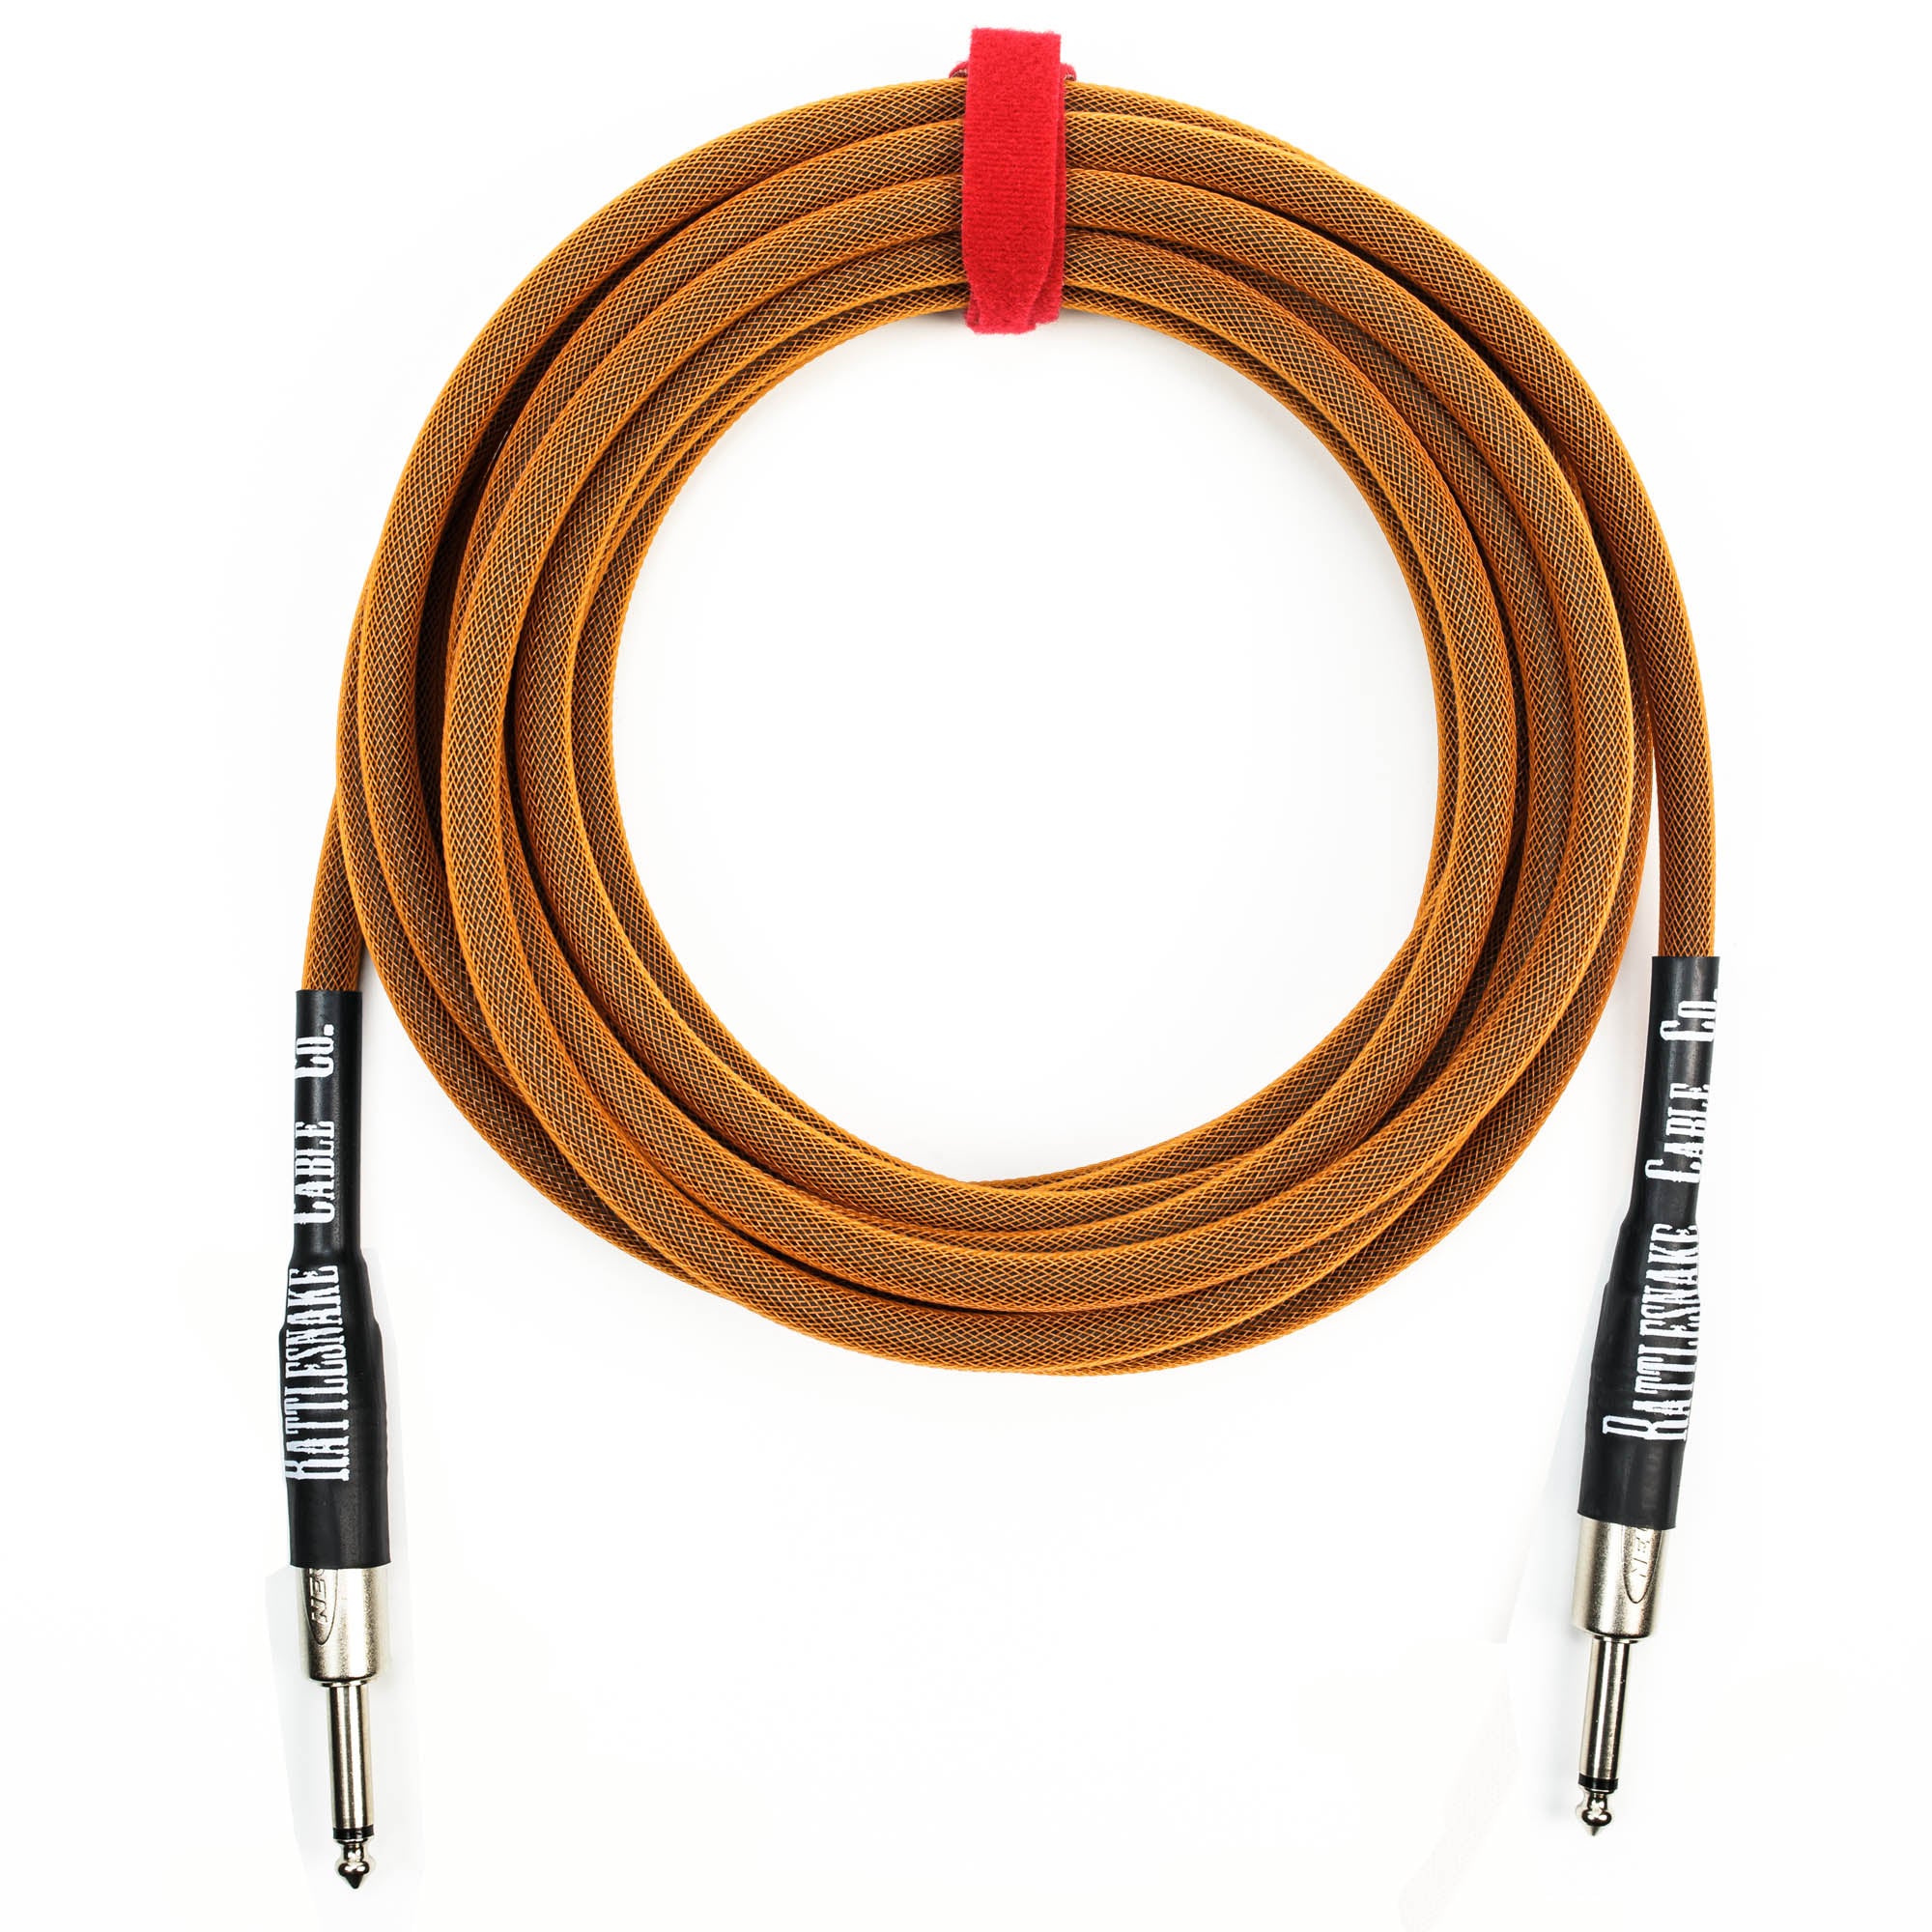 Rattlesnake Cable Company 20' Copper Guitar Cable - Straight Plugs